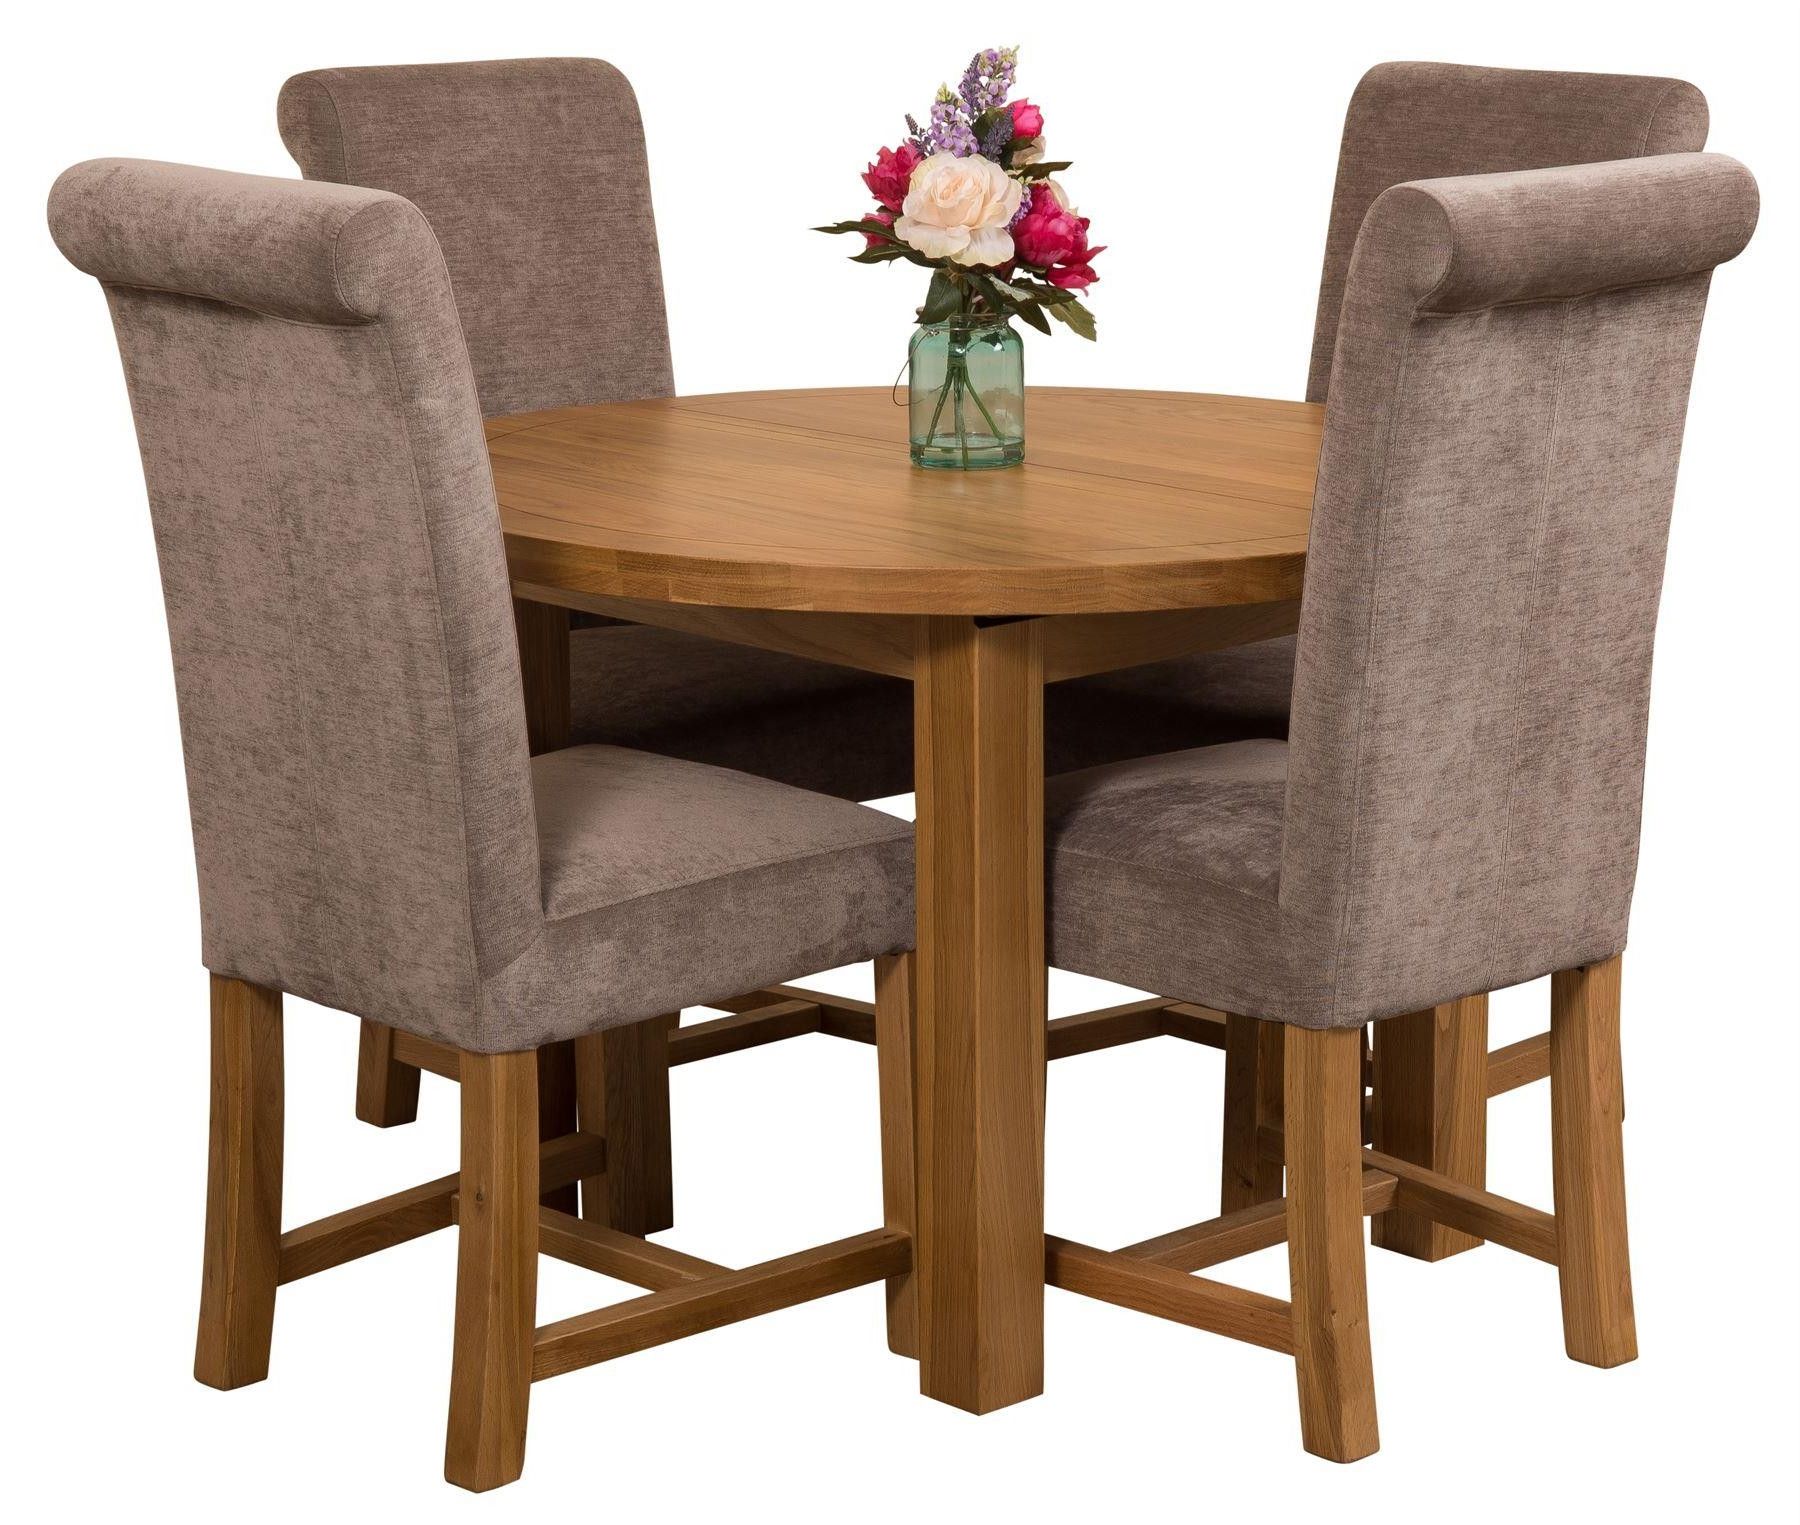 2019 Extendable Oval Dining Sets With Regard To Edmonton Solid Oak Extending Oval Dining Table With 4 Washington Dining (View 8 of 15)